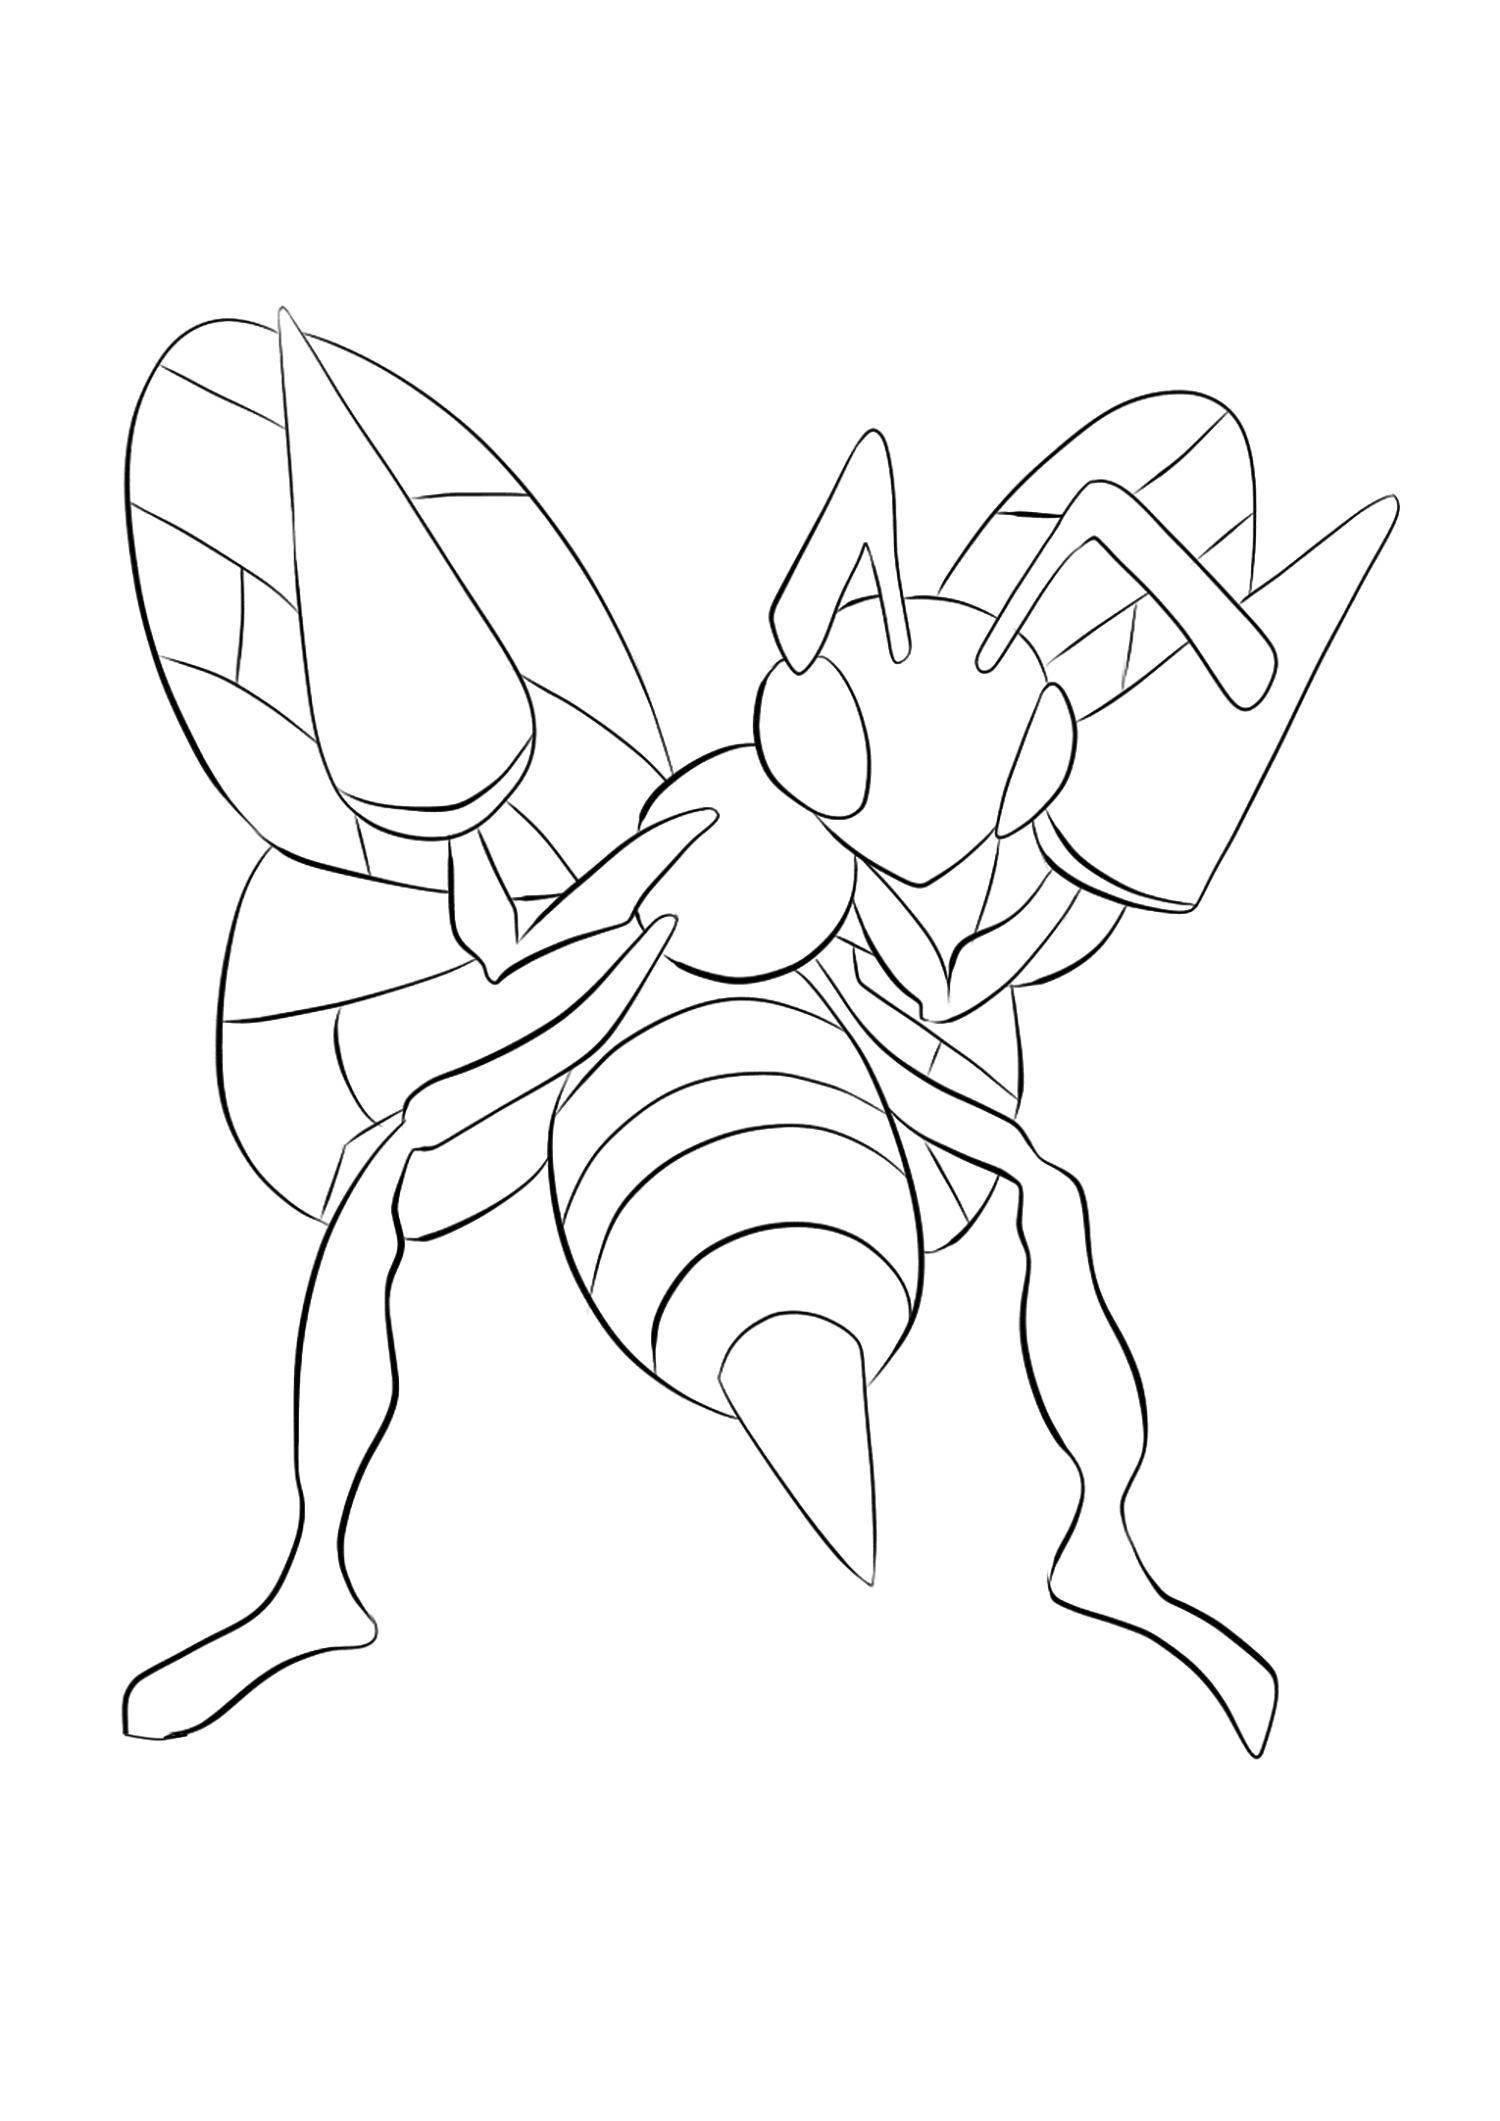 Beedrill (No.15). Beedrill Coloring page, Generation I Pokemon of type Bug and PoisonOriginal image credit: Pokemon linearts by Lilly Gerbil'font-size:smaller;color:gray'>Permission: All rights reserved © Pokemon company and Ken Sugimori.